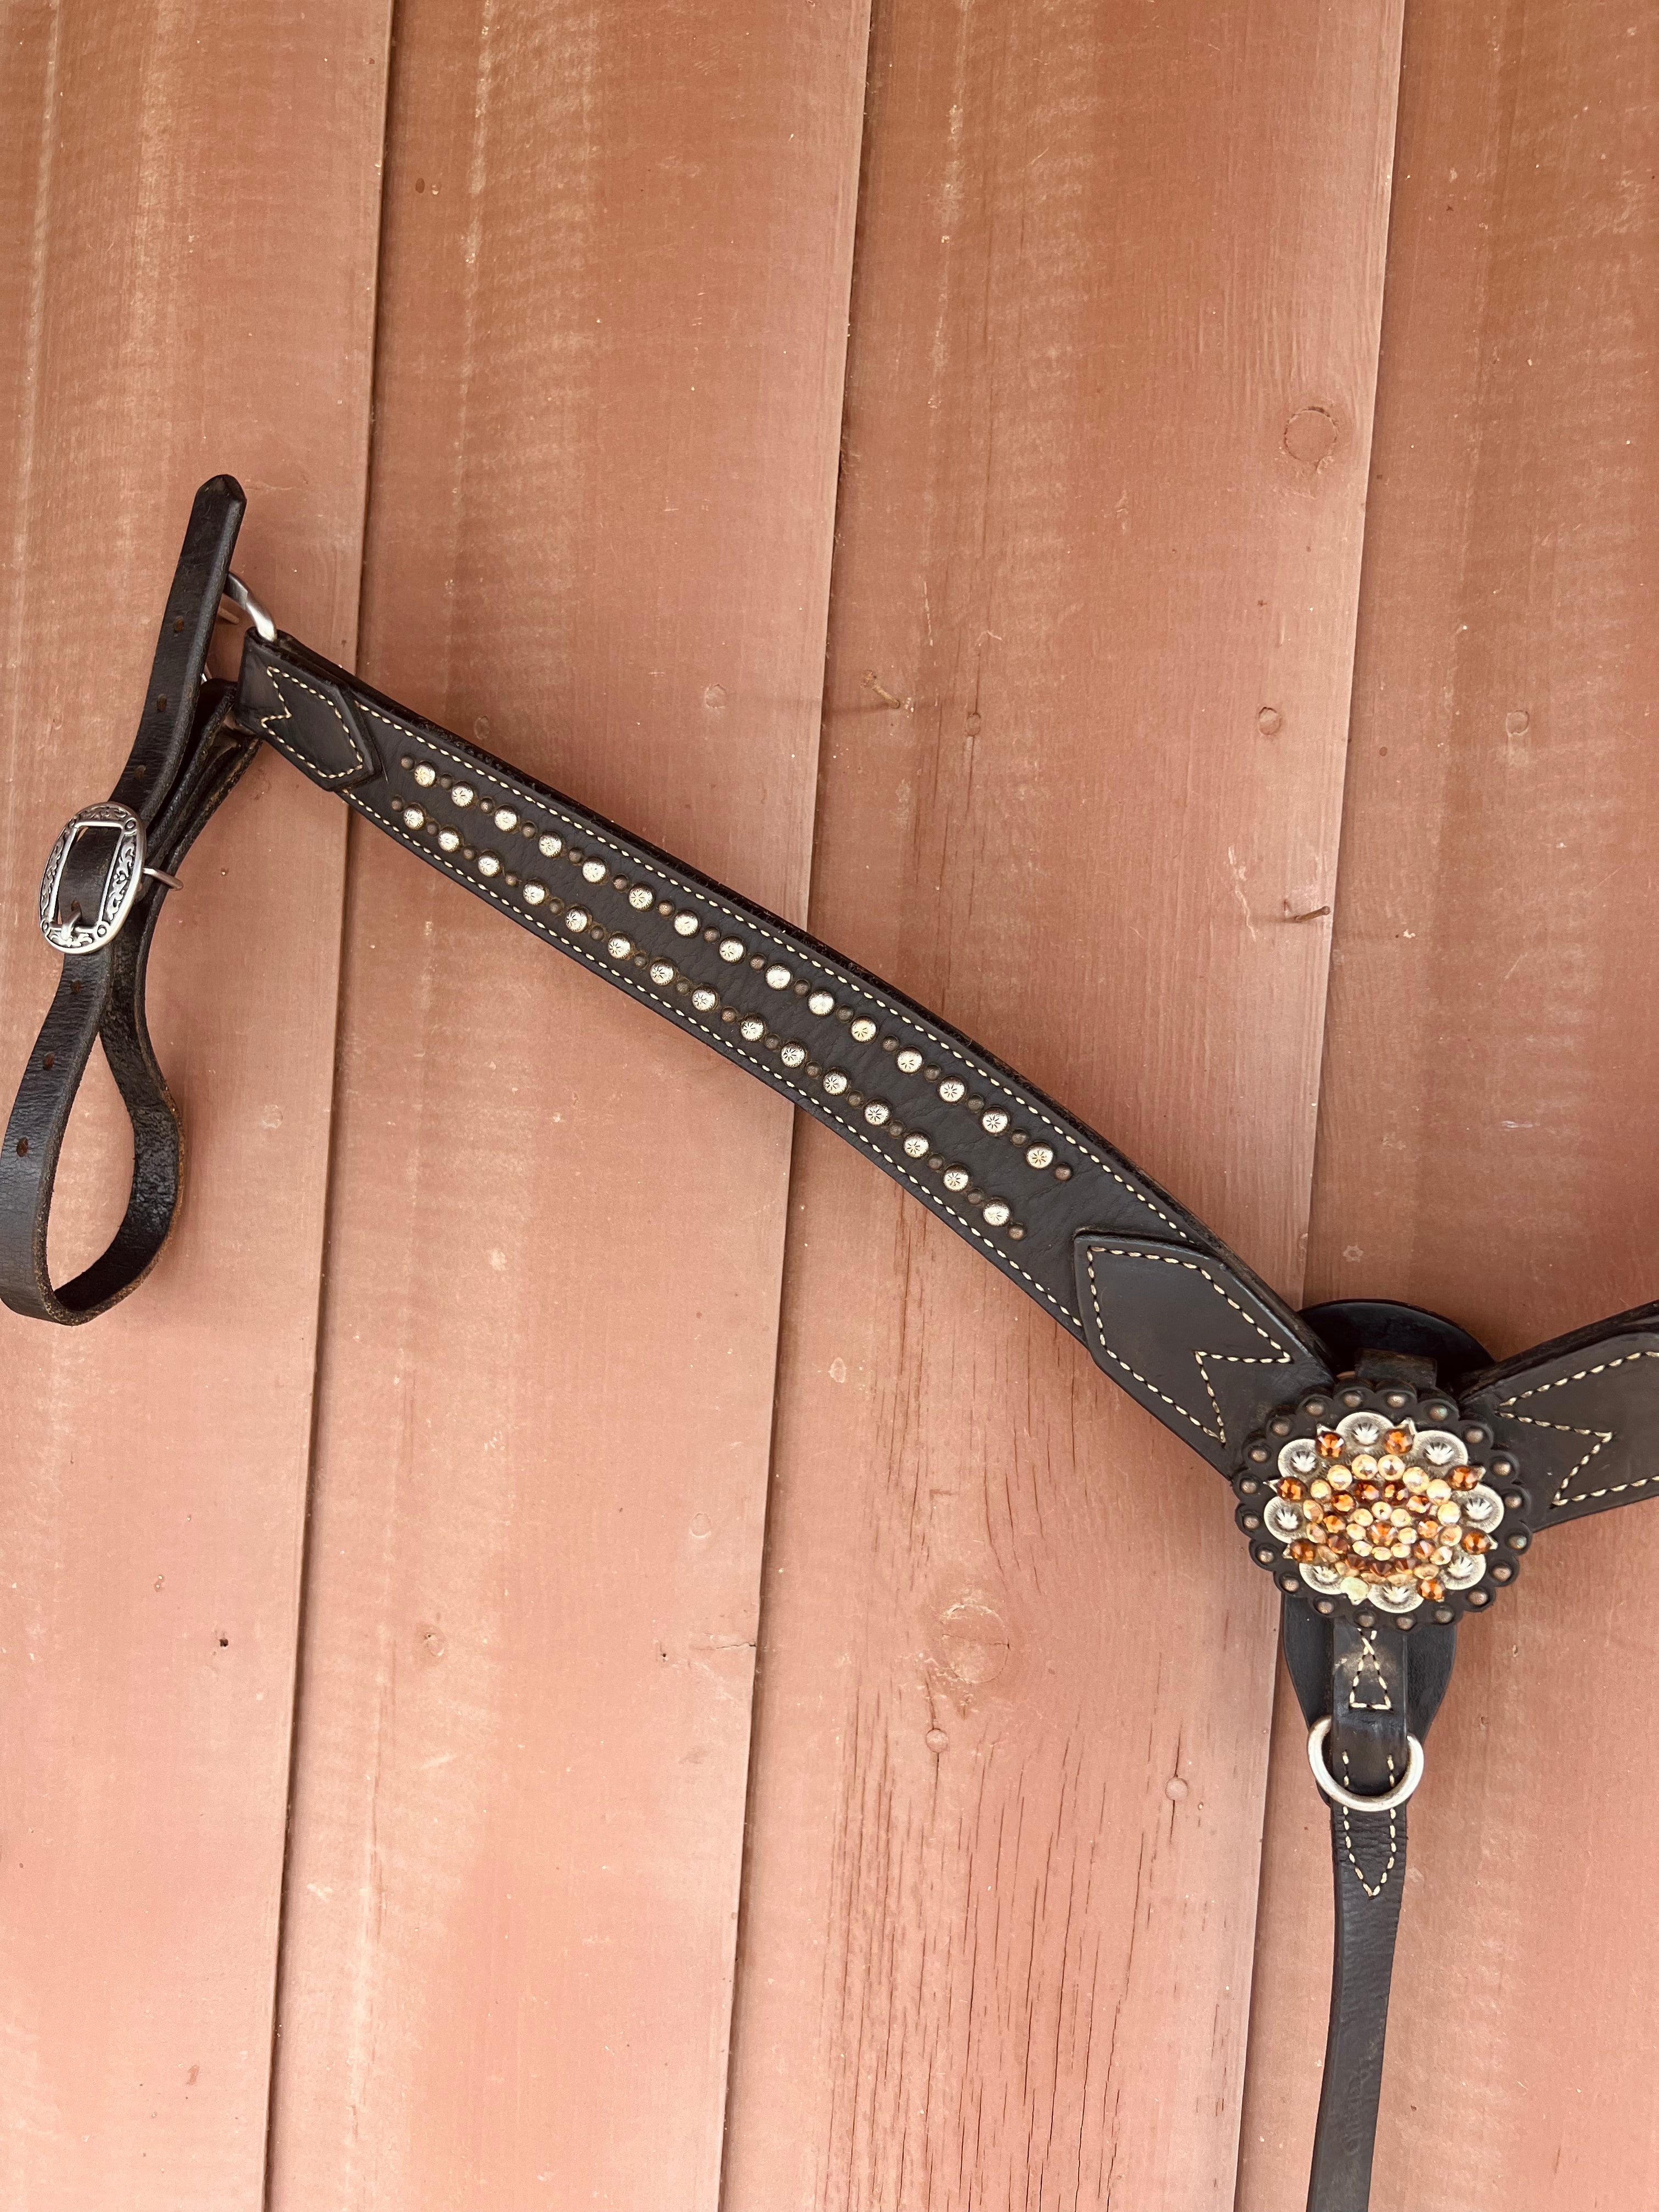 Studded Breast Collar - Black Leather with Large Center Concho